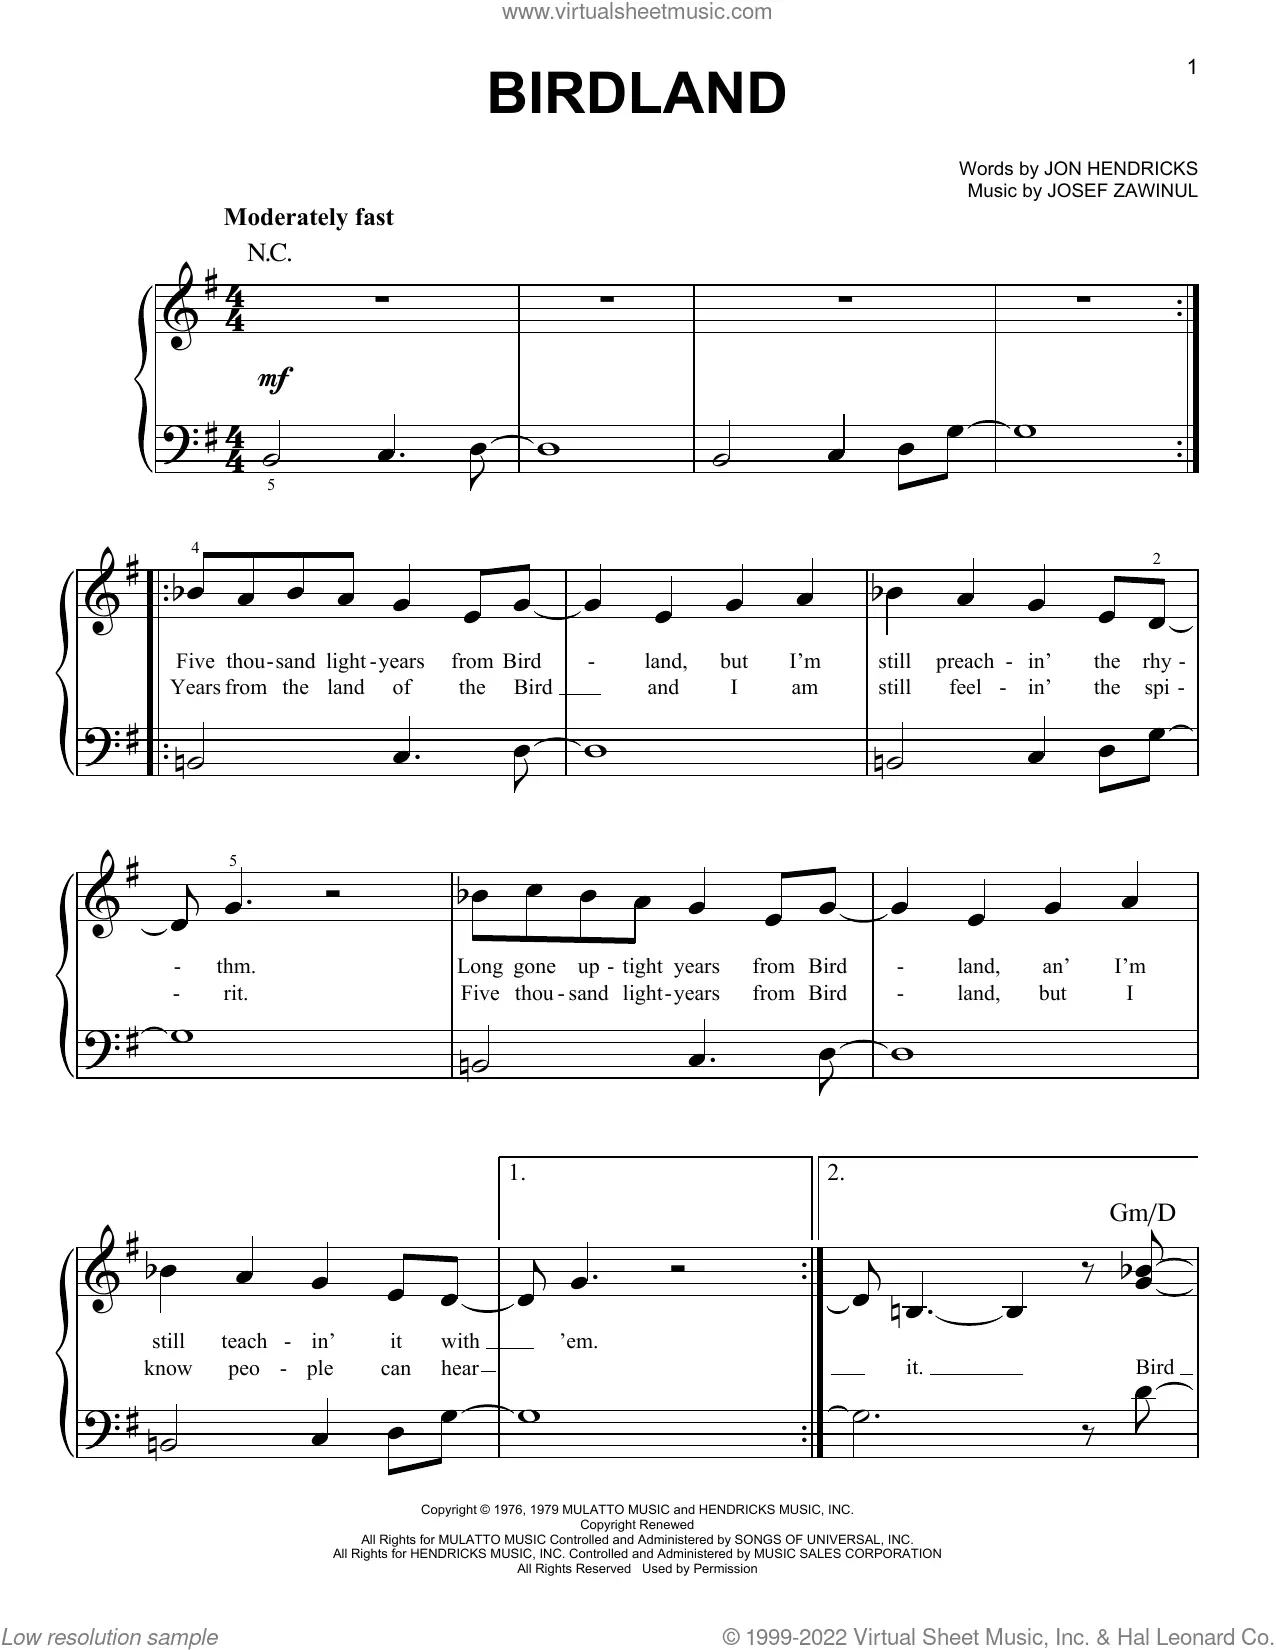 Weather Report Sheet Music to download and print